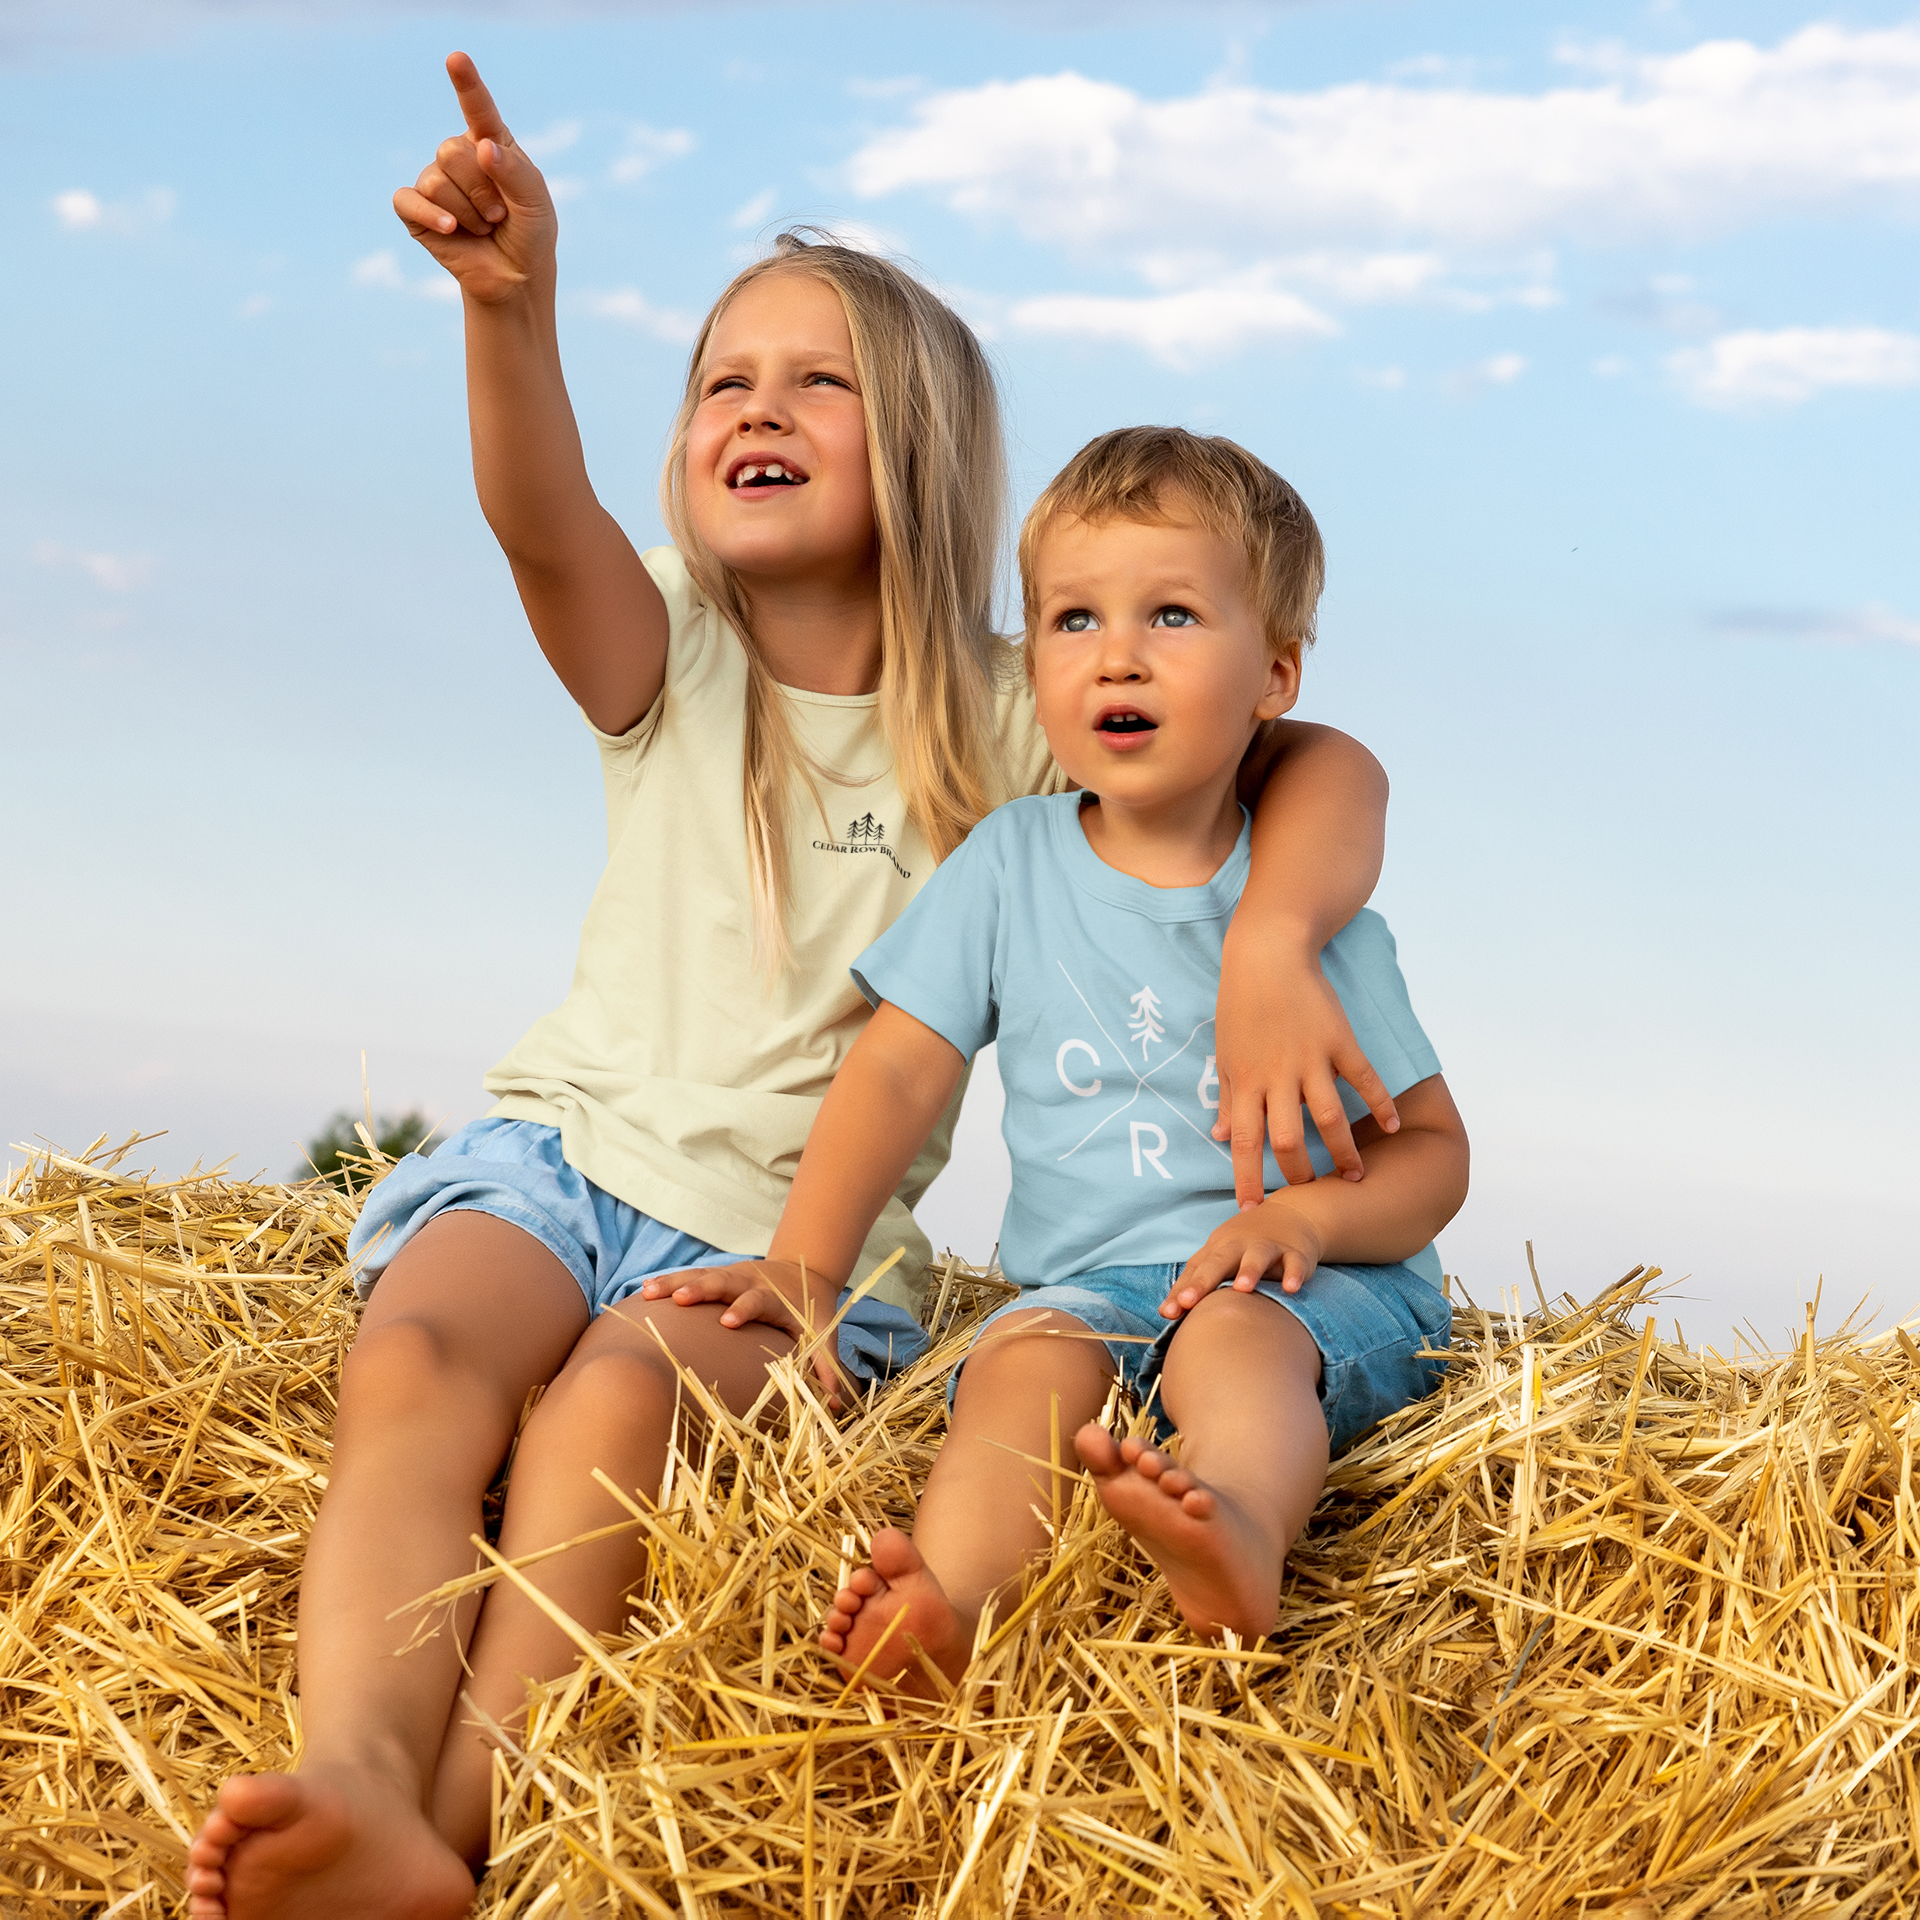 kids on a haybale wearing southern inspired tshirts